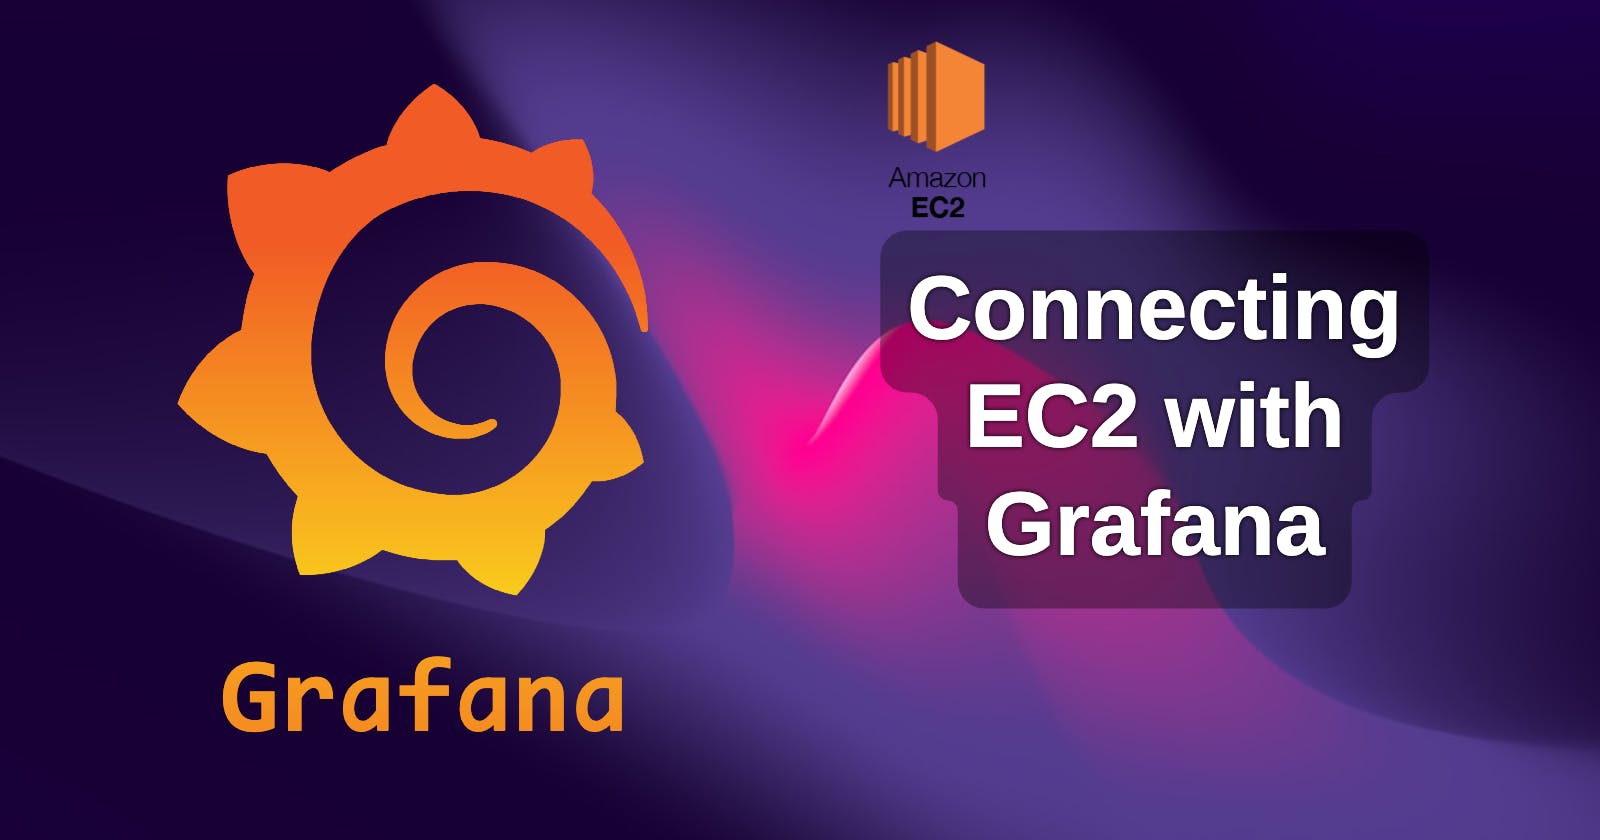 Connecting EC2 with Grafana